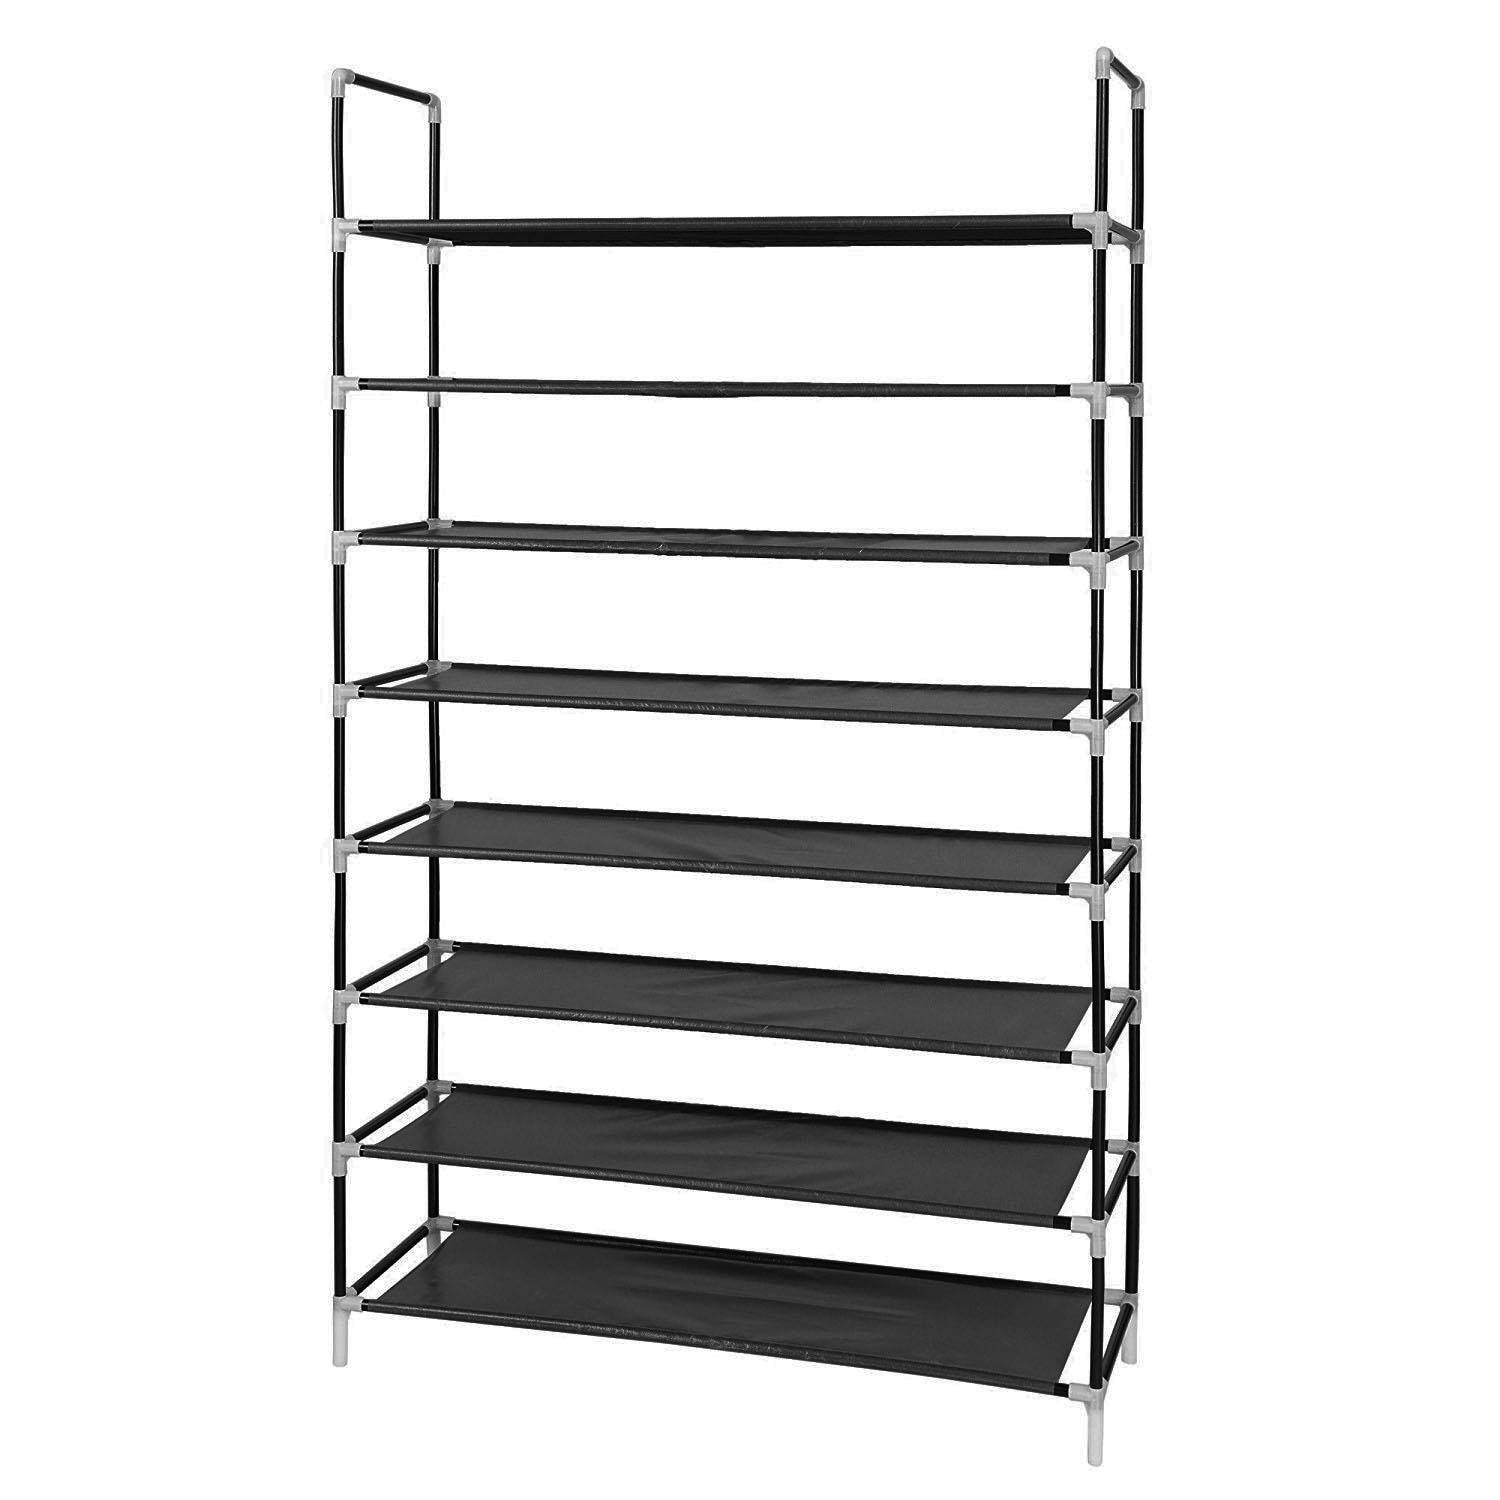 https://ak1.ostkcdn.com/images/products/is/images/direct/0345b98eab40a72f5bedfbacc5bacfbe119a3e8c/8-Tiers-Shoe-Rack-Tower-Storage-Shelf-and-Organizer-Cabinet-Holder%2CBlack.jpg